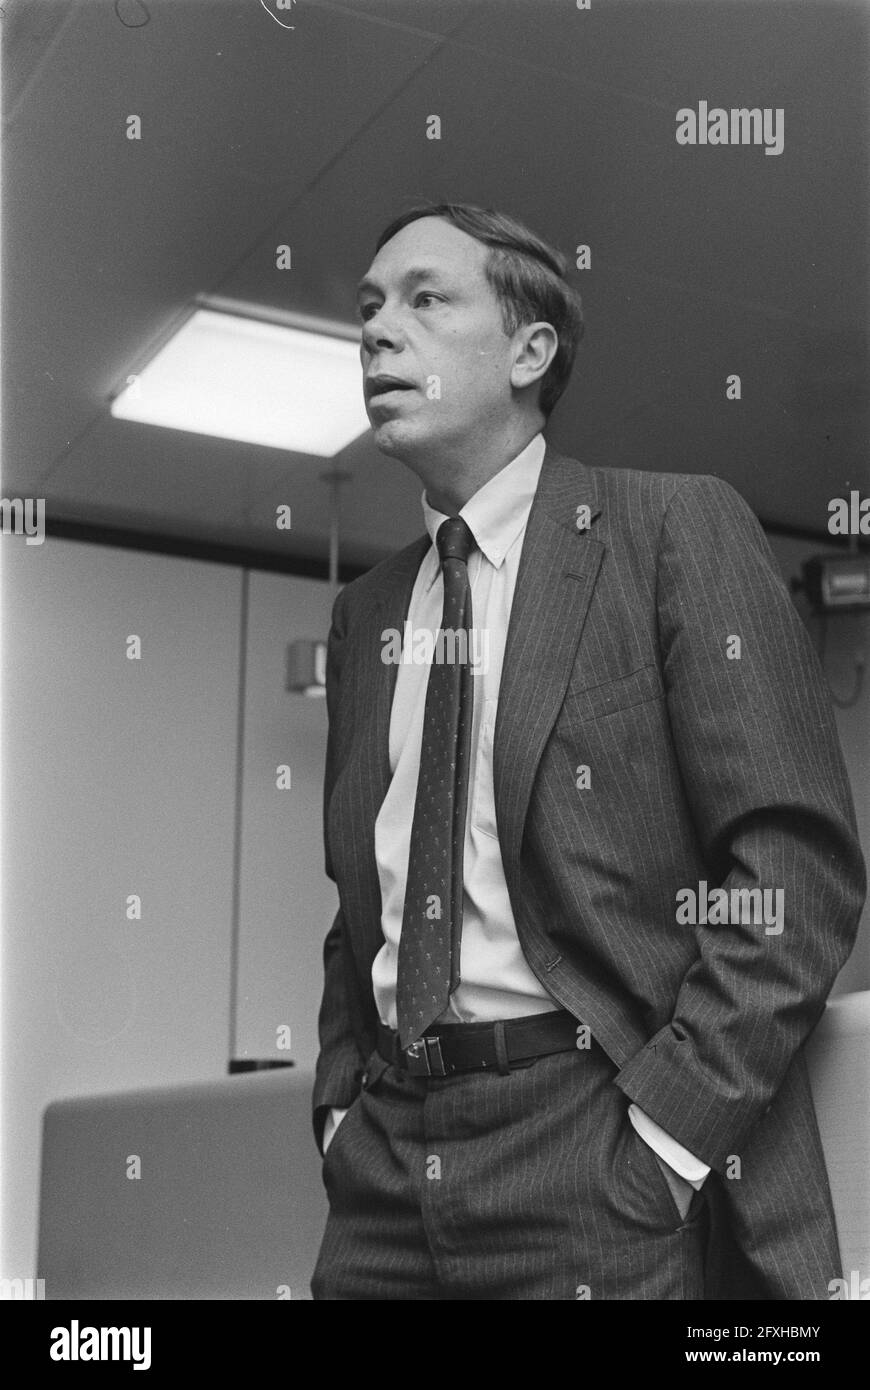 Chairman Board of Directors Atari (game computer), James J. Morgan gives press conference at Schiphol Airport, April 16, 1984, press conferences, presidents, The Netherlands, 20th century press agency photo, news to remember, documentary, historic photography 1945-1990, visual stories, human history of the Twentieth Century, capturing moments in time Stock Photo